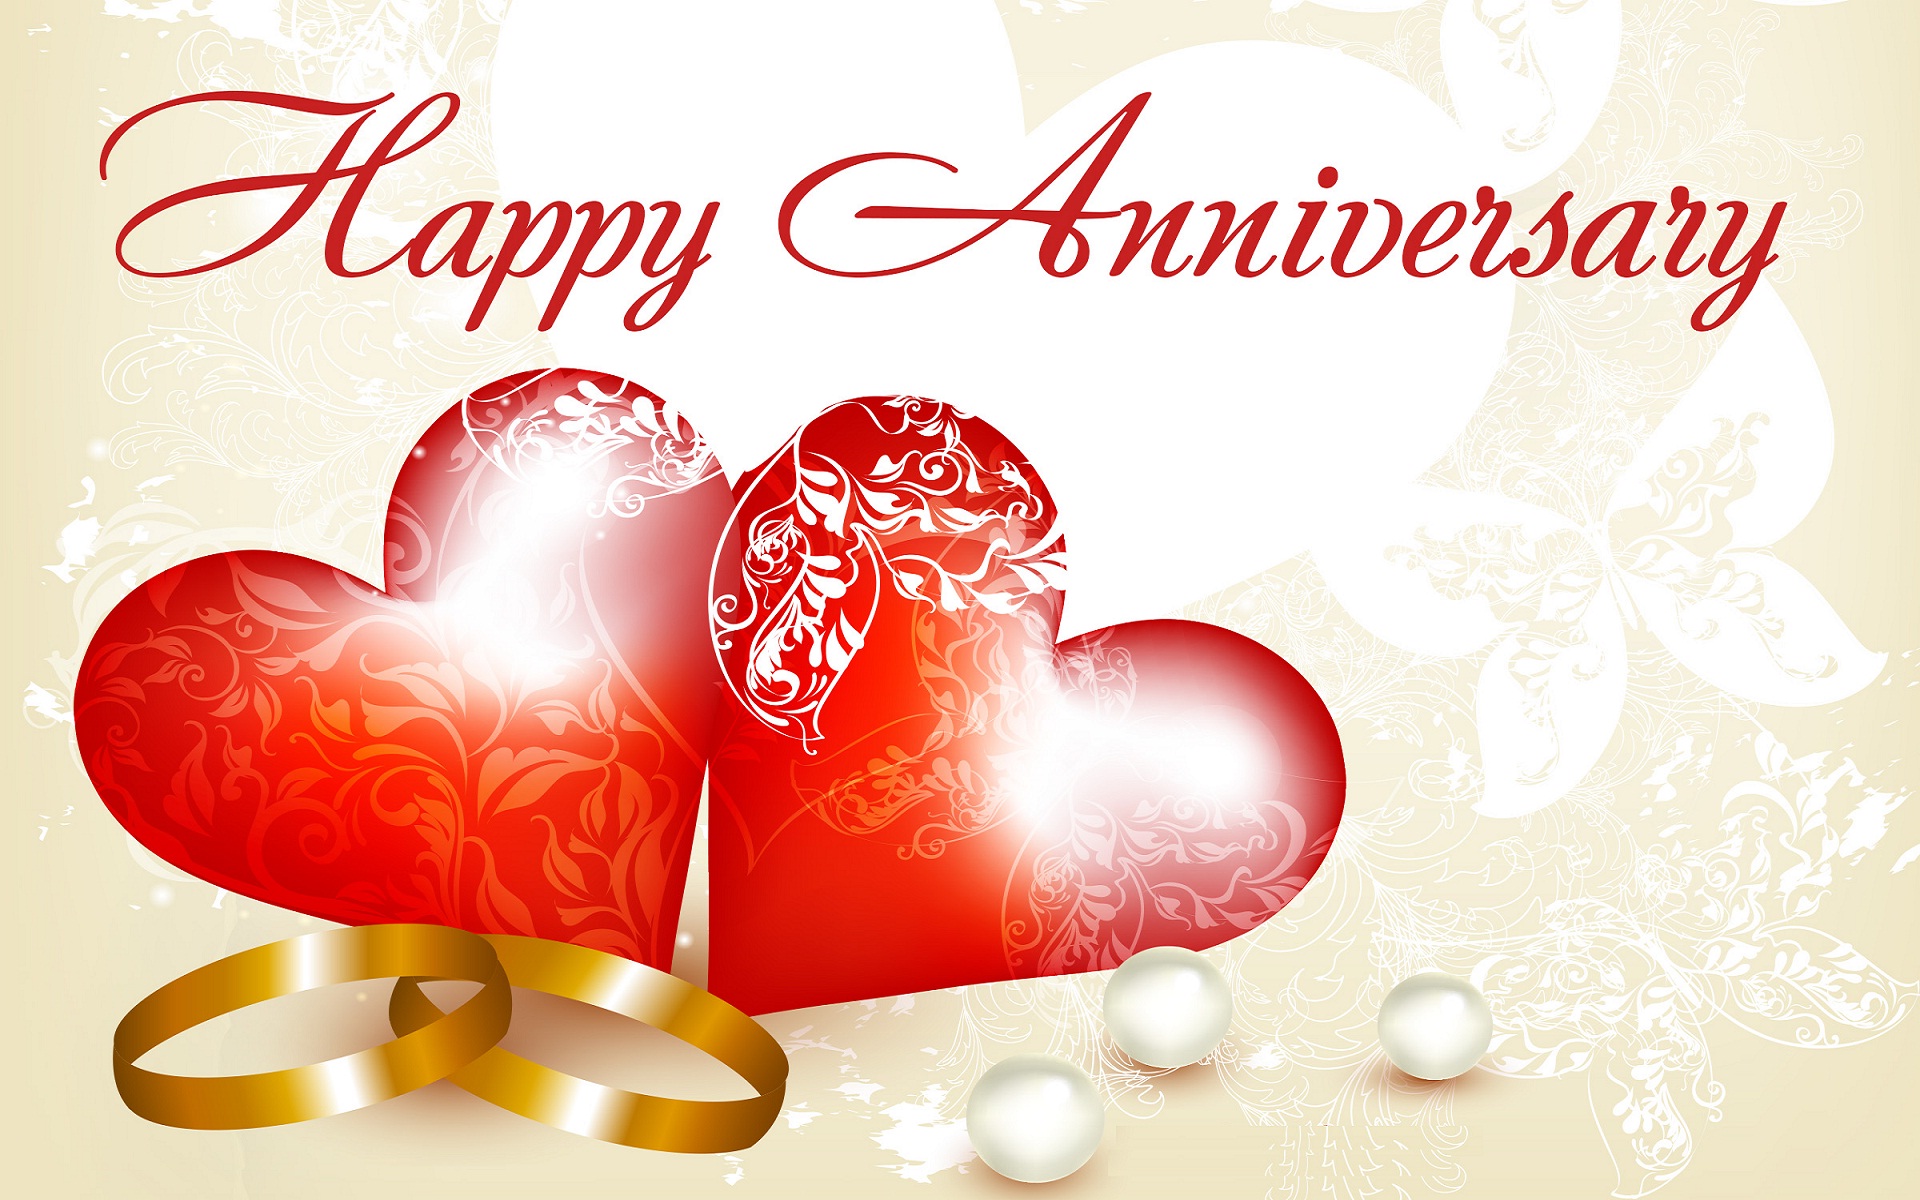 Happy Anniversary Images Wallpapers Download - iEnglish Status